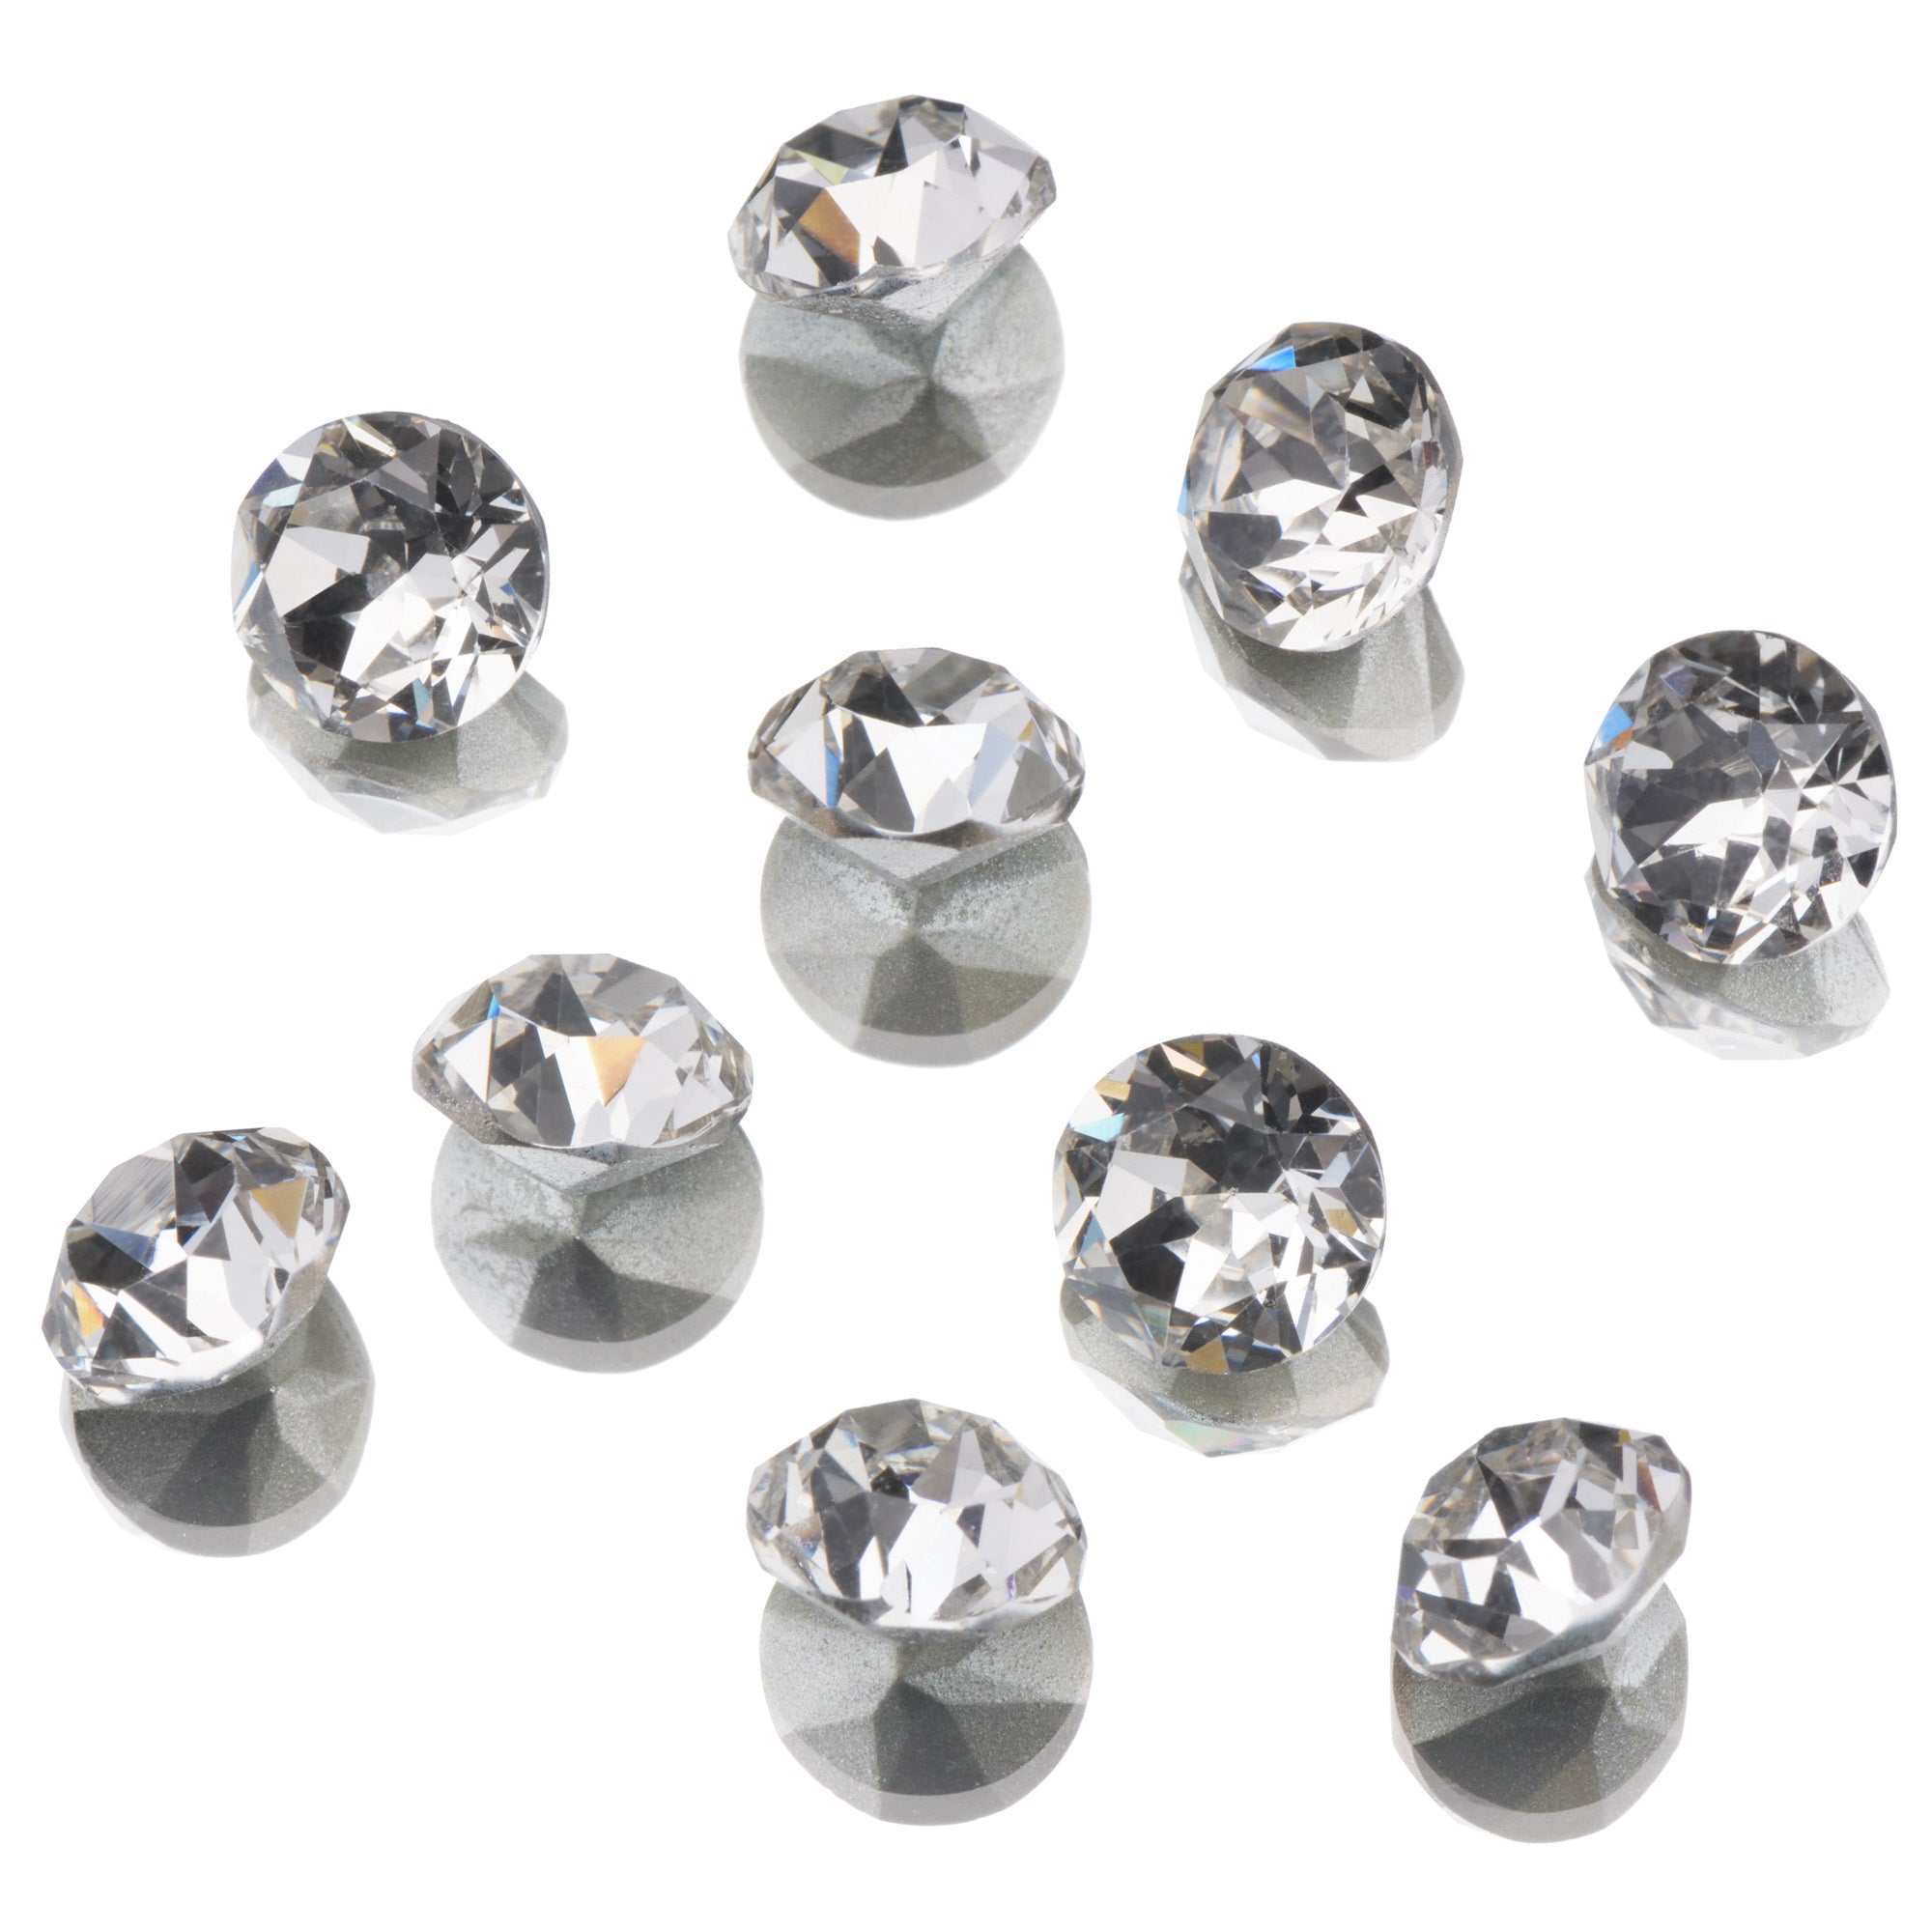 POINTED BACK RHINESTONES - 10pk – Ugly Duckling Nails Inc.